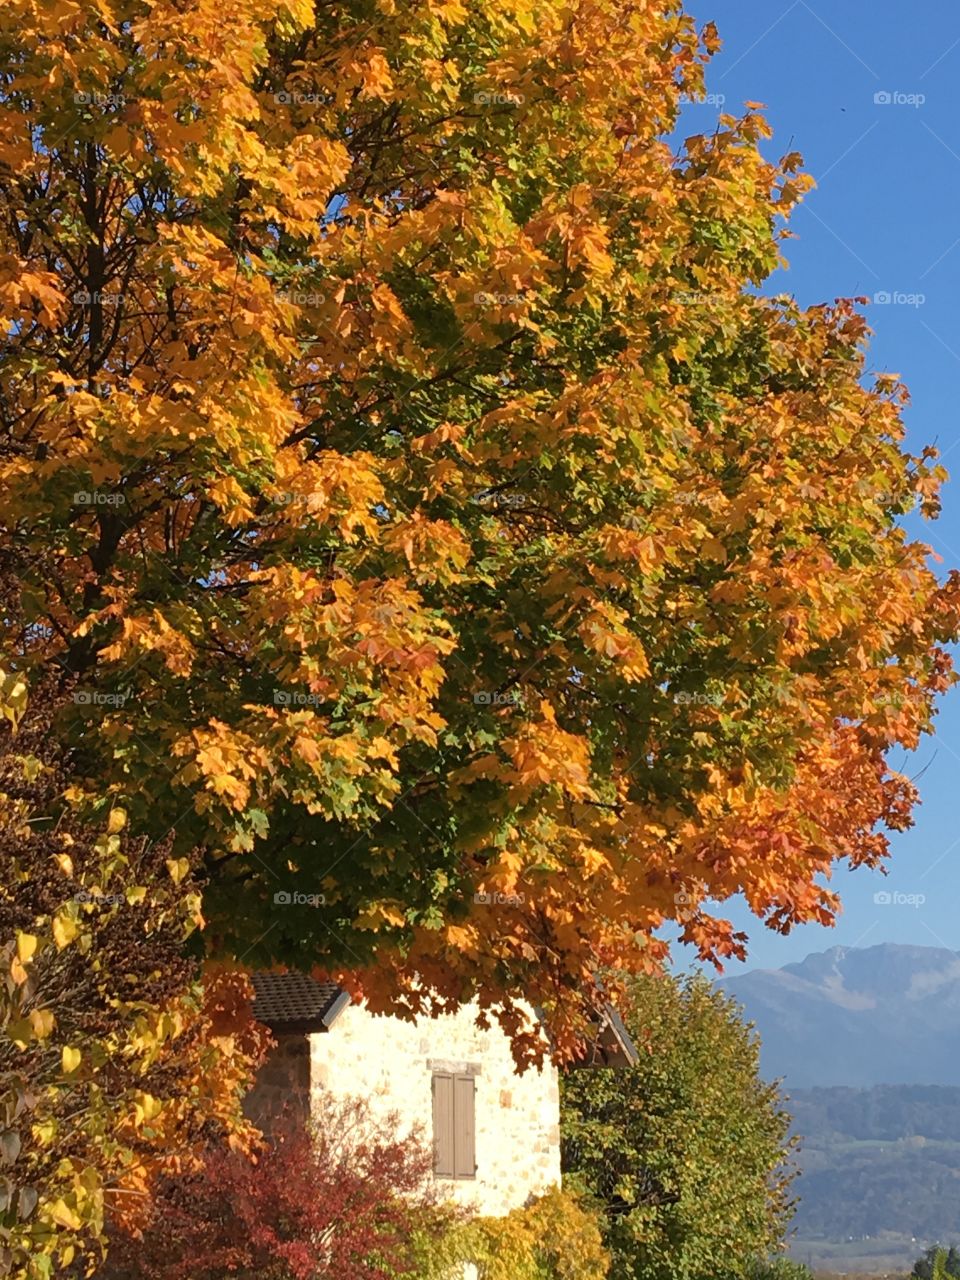 Colorful and majestic tree in autumn near old house with mountains in background 